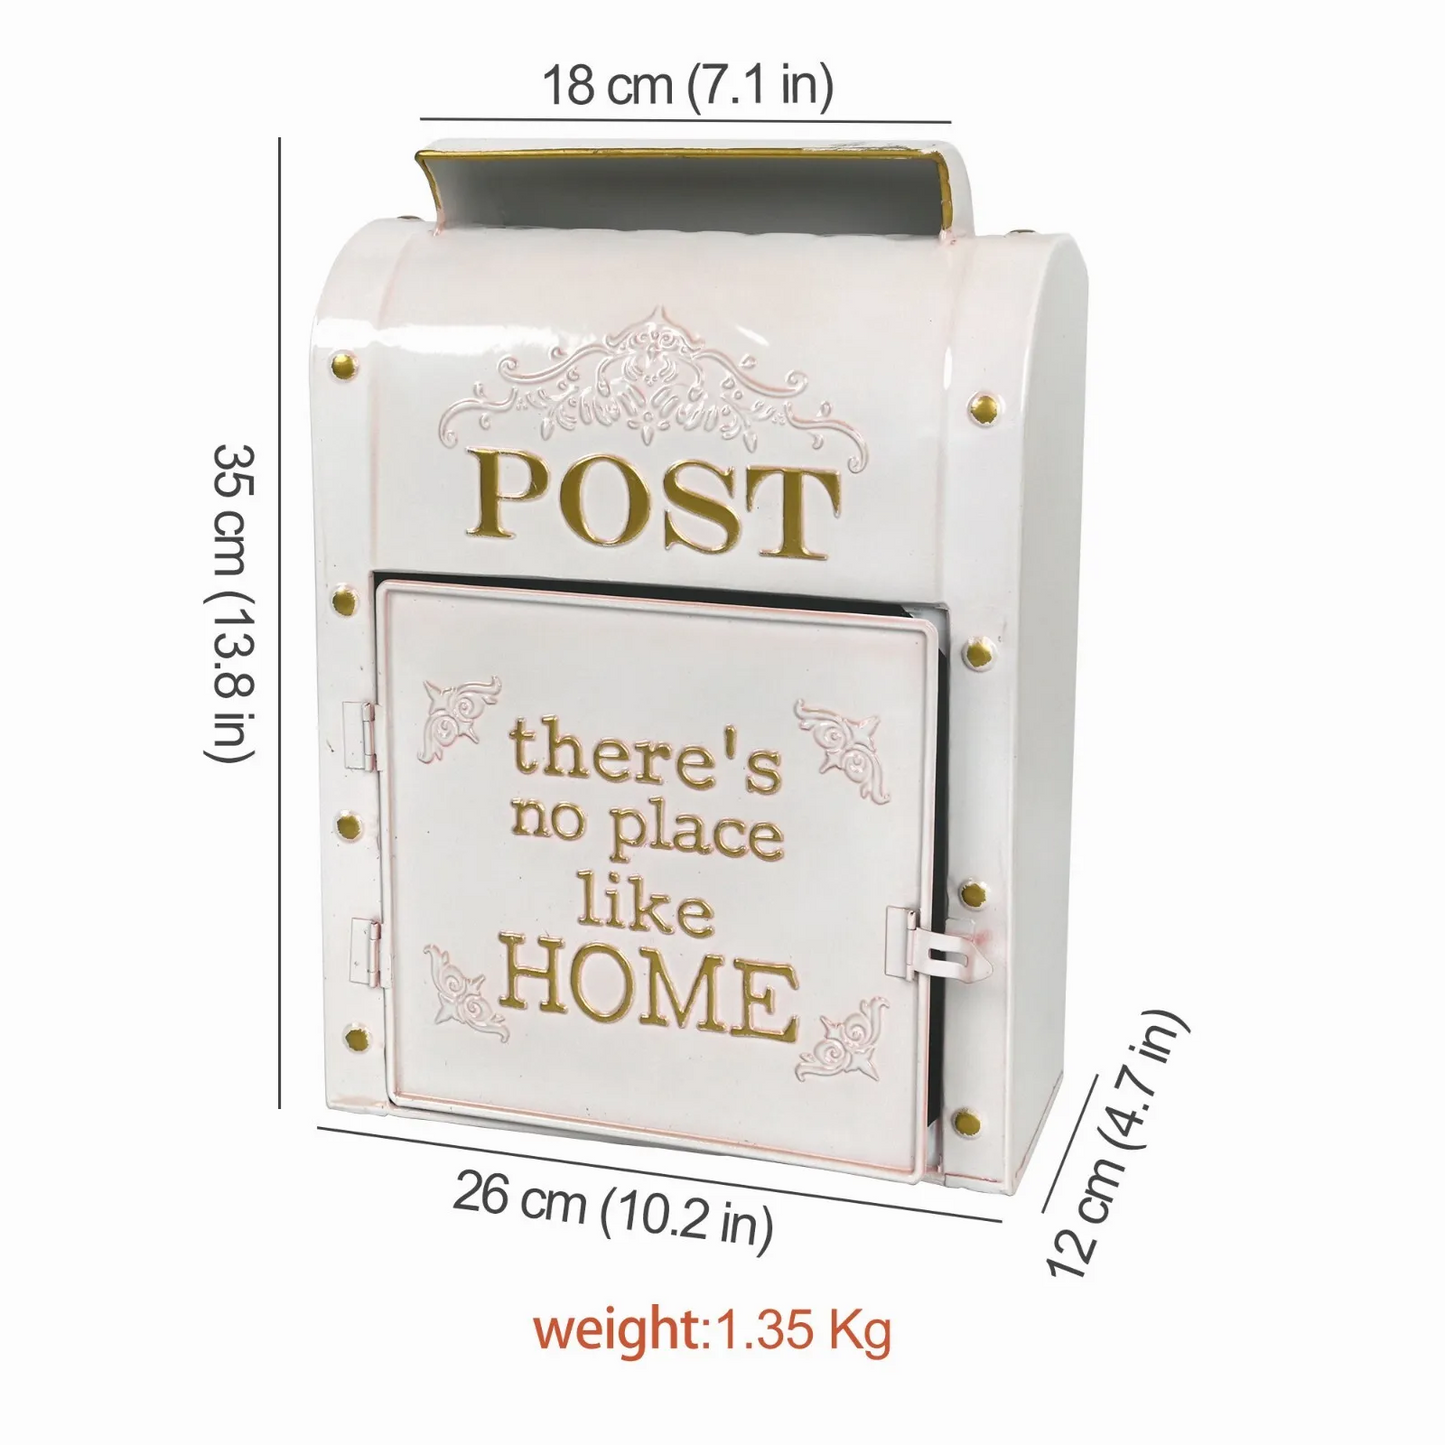 Charming 'There's No Place Like Home' Mailbox - Vintage-Inspired Decorative Mail Holder